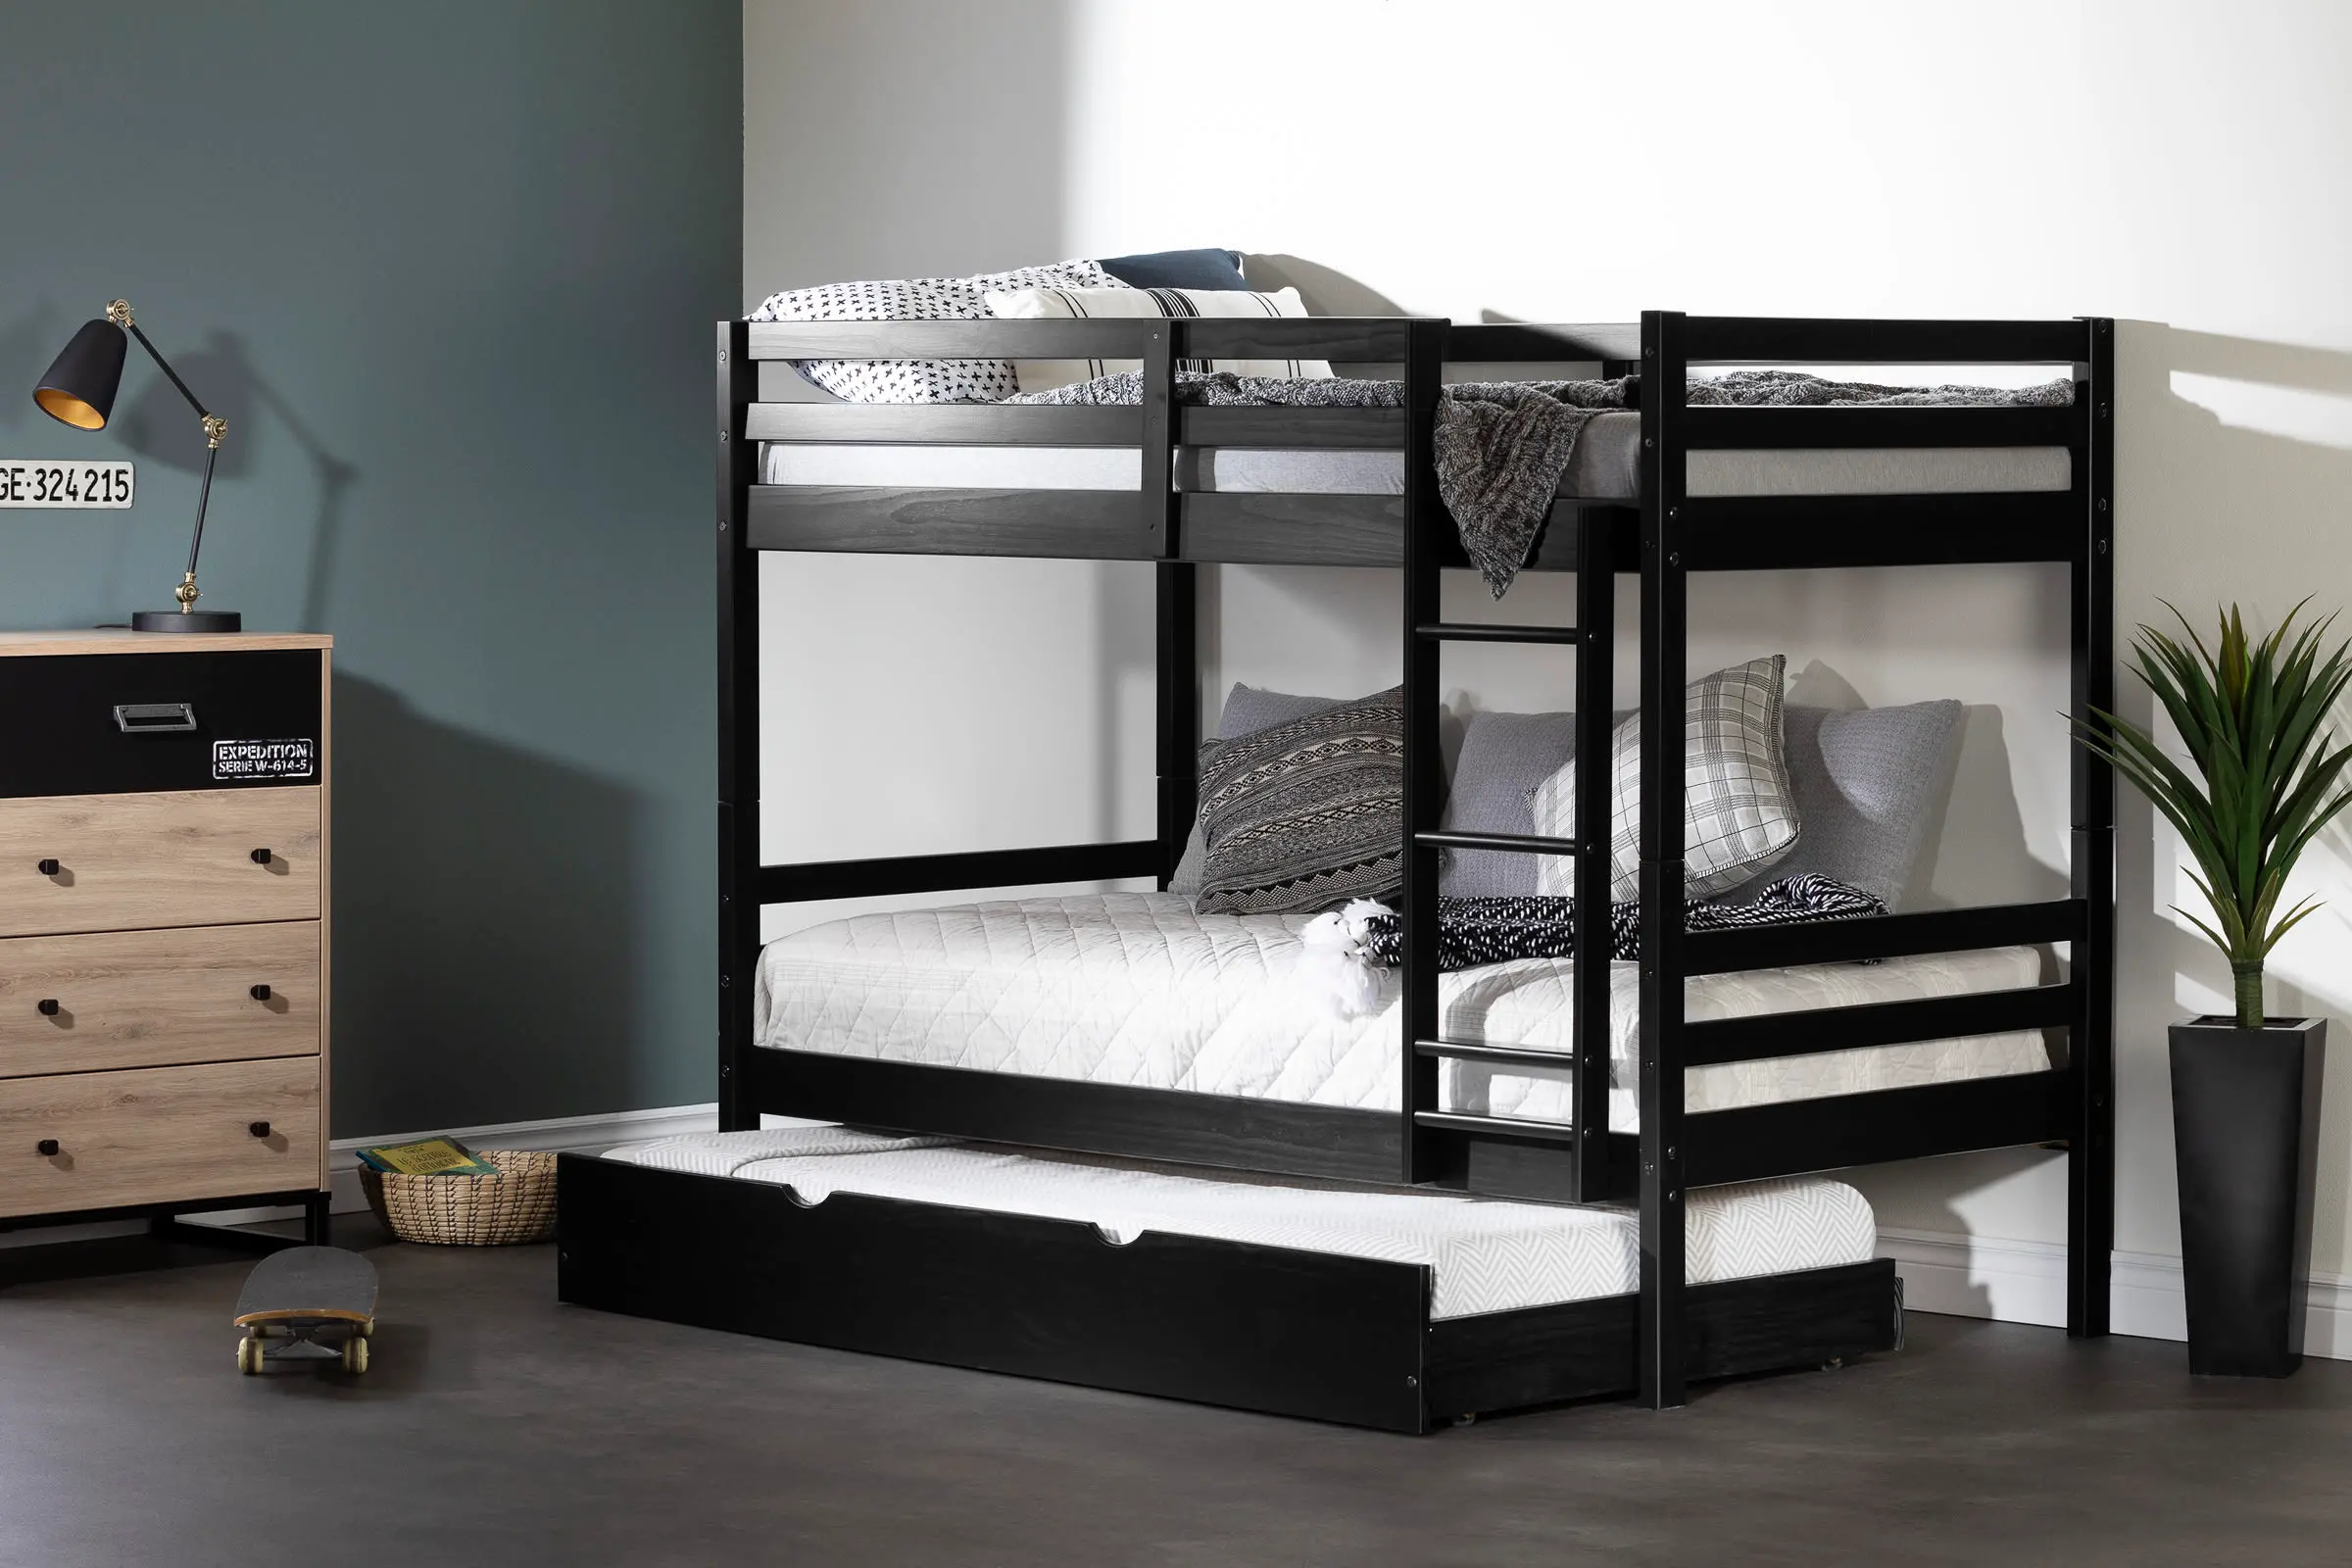 Fakto Black Twin Bunk Beds with Trundle - South Shore